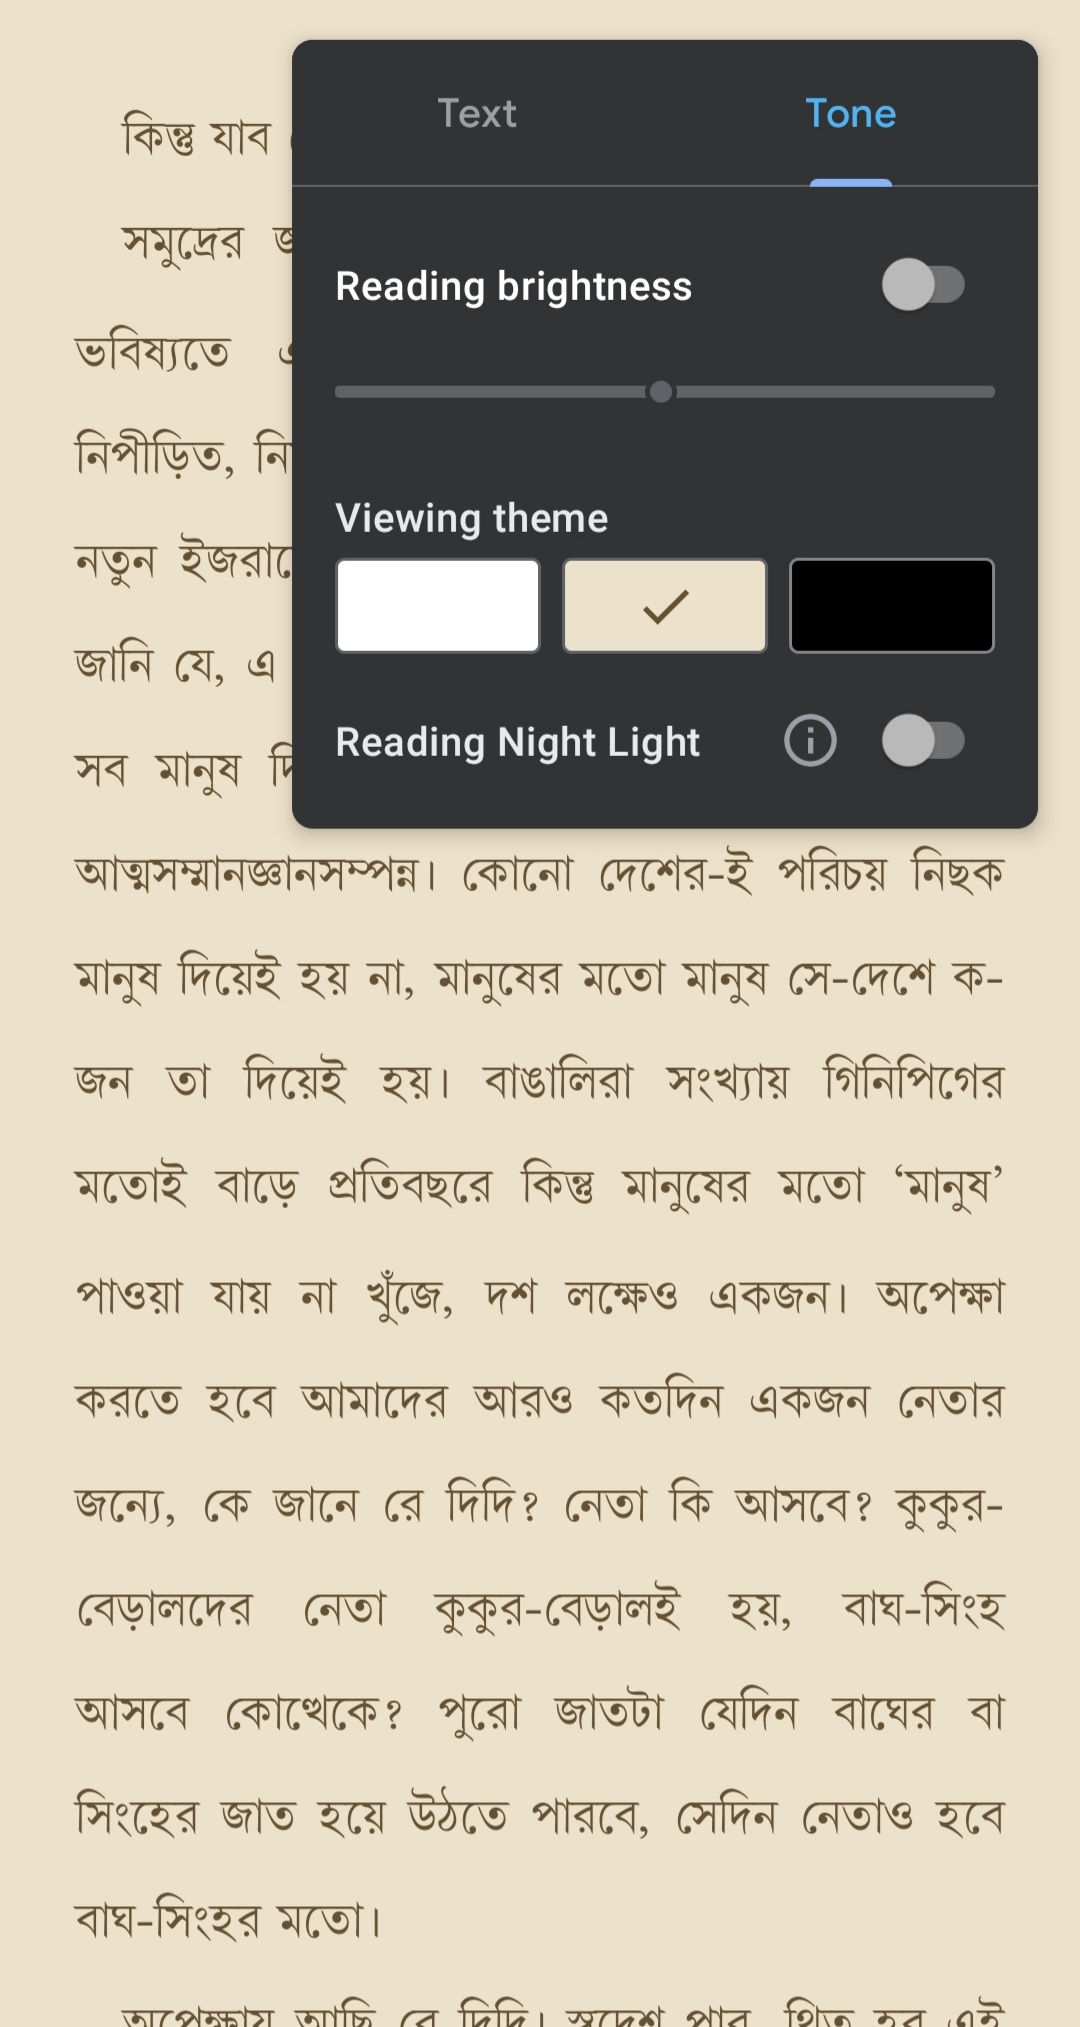 How To Turn On/Off Reading Night Light In Google Play Books?